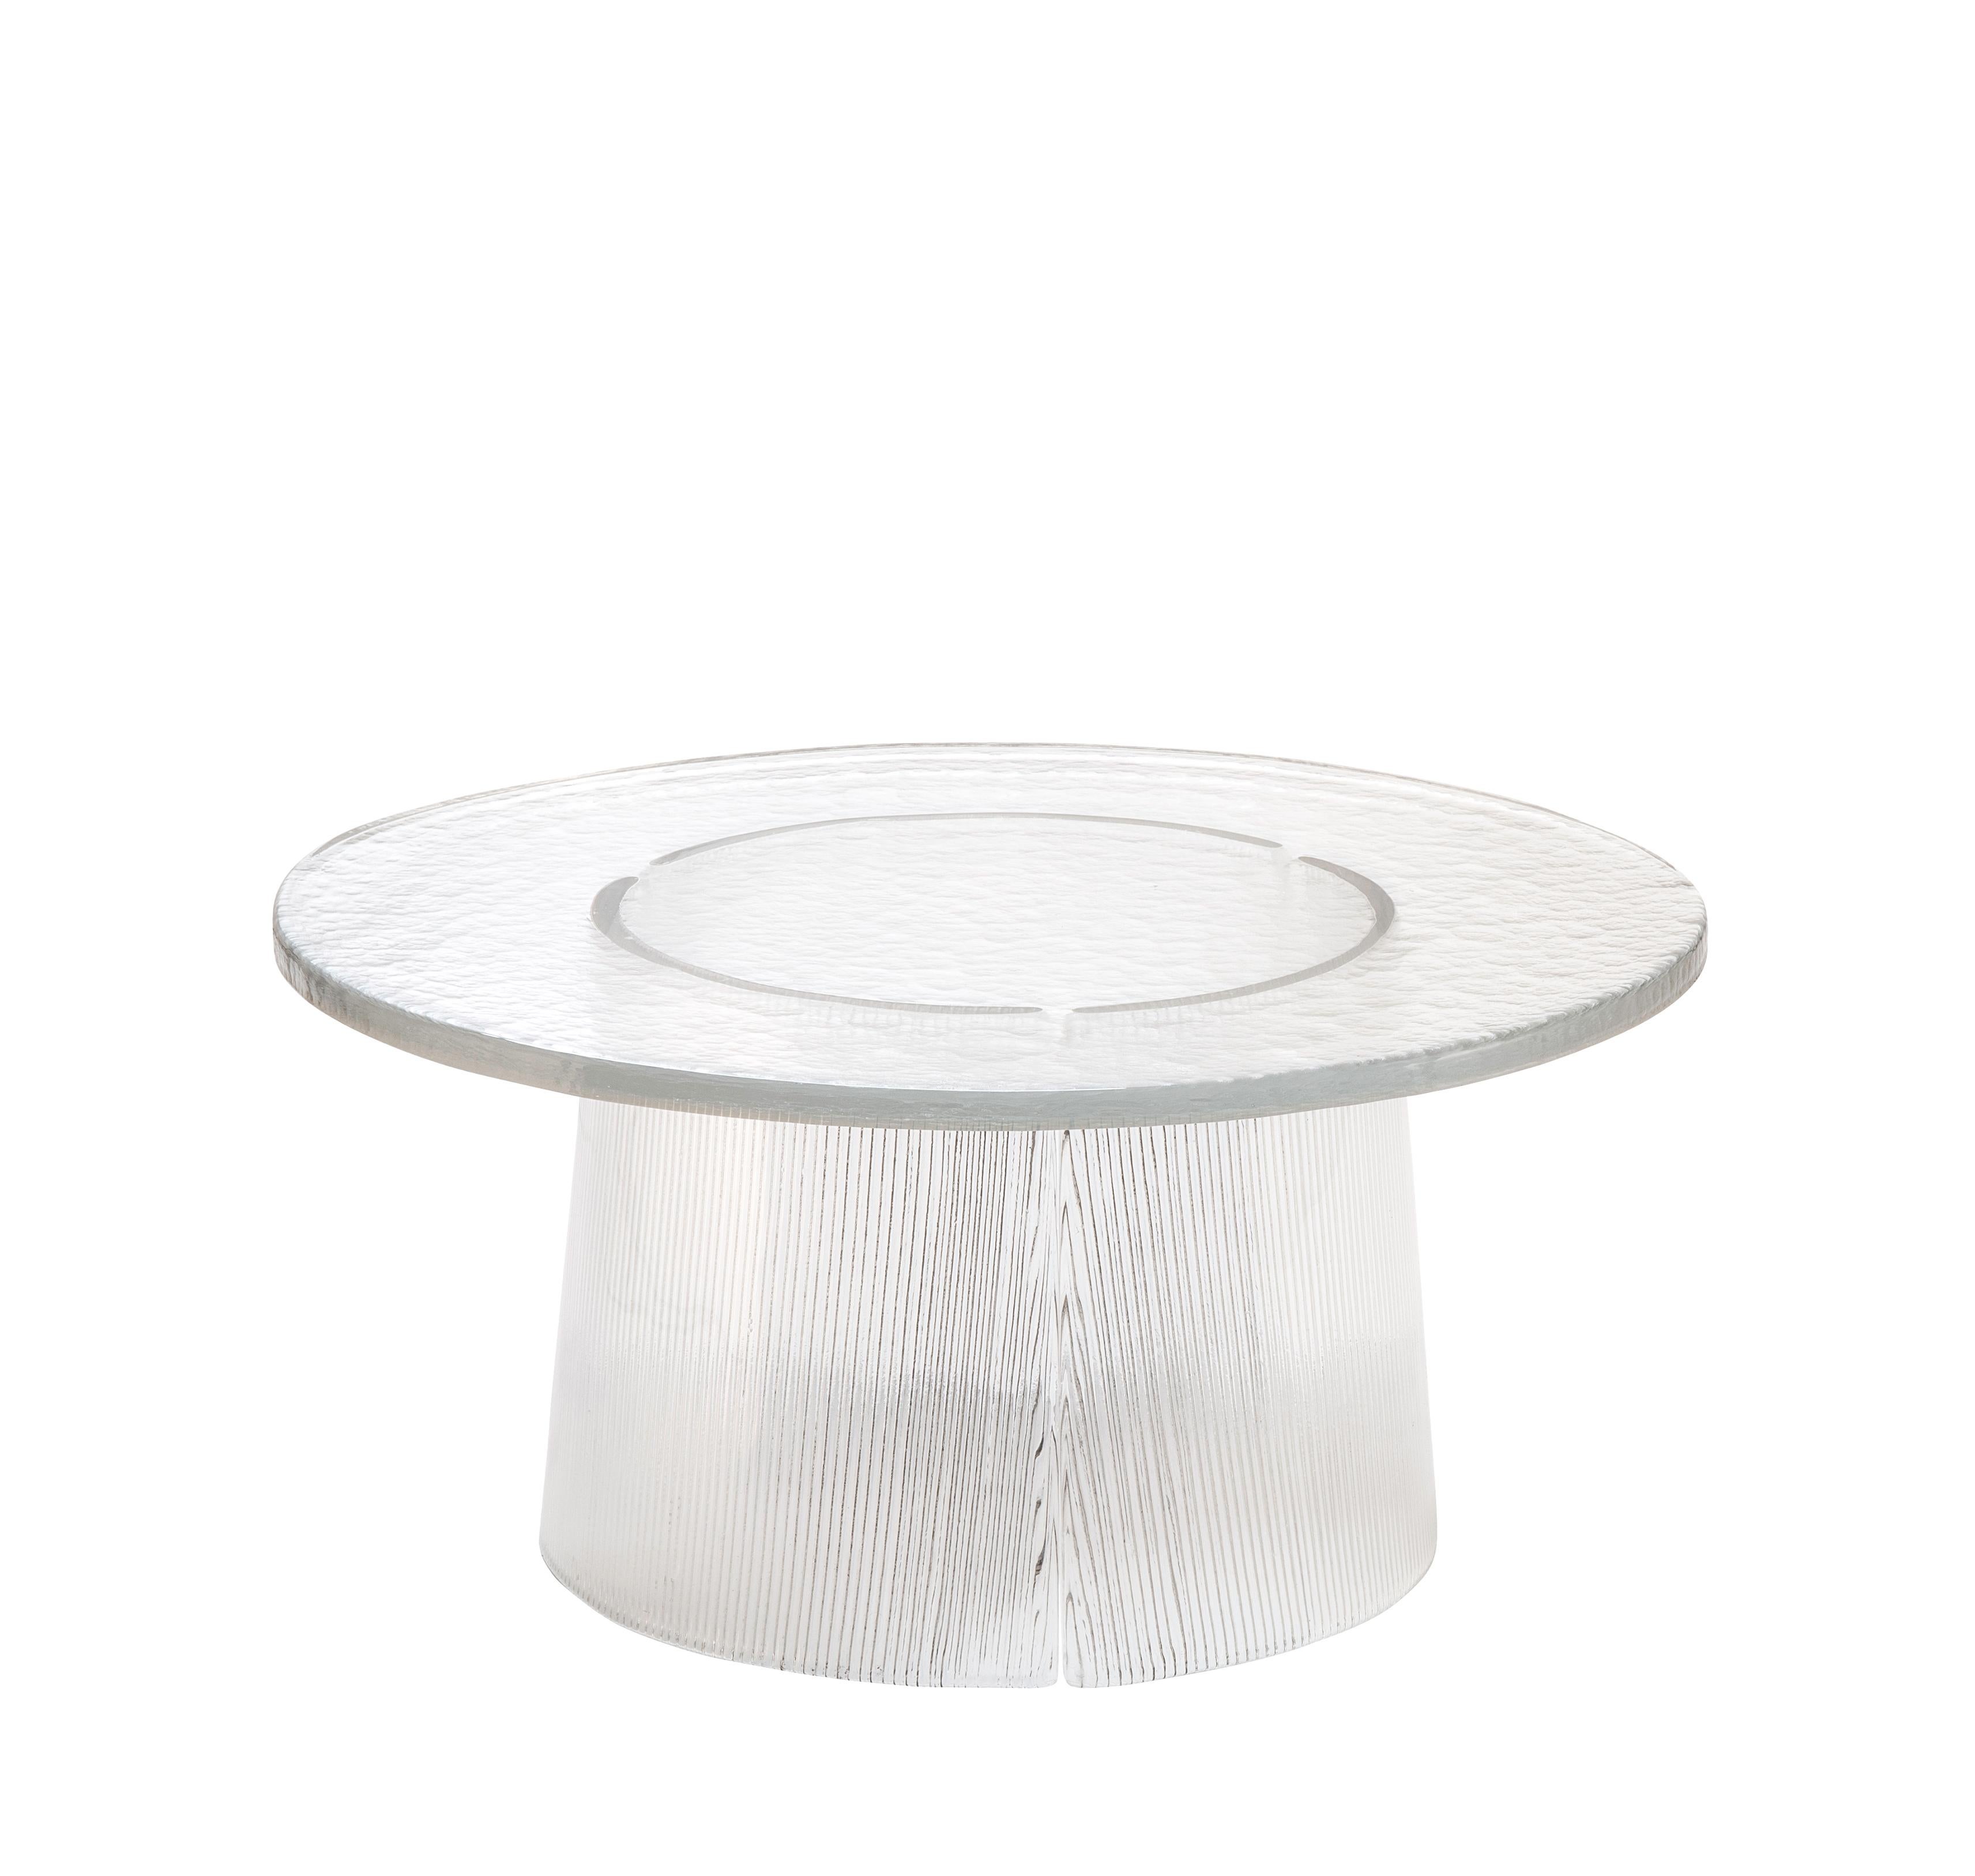 Bent side table big transparent by Pulpo
Dimensions: D75 x H35 cm.
Materials: casted glass.

Also available in different finishes and dimensions. 

The bubbled surface of the cast glass table top dances against with the smooth lines of the